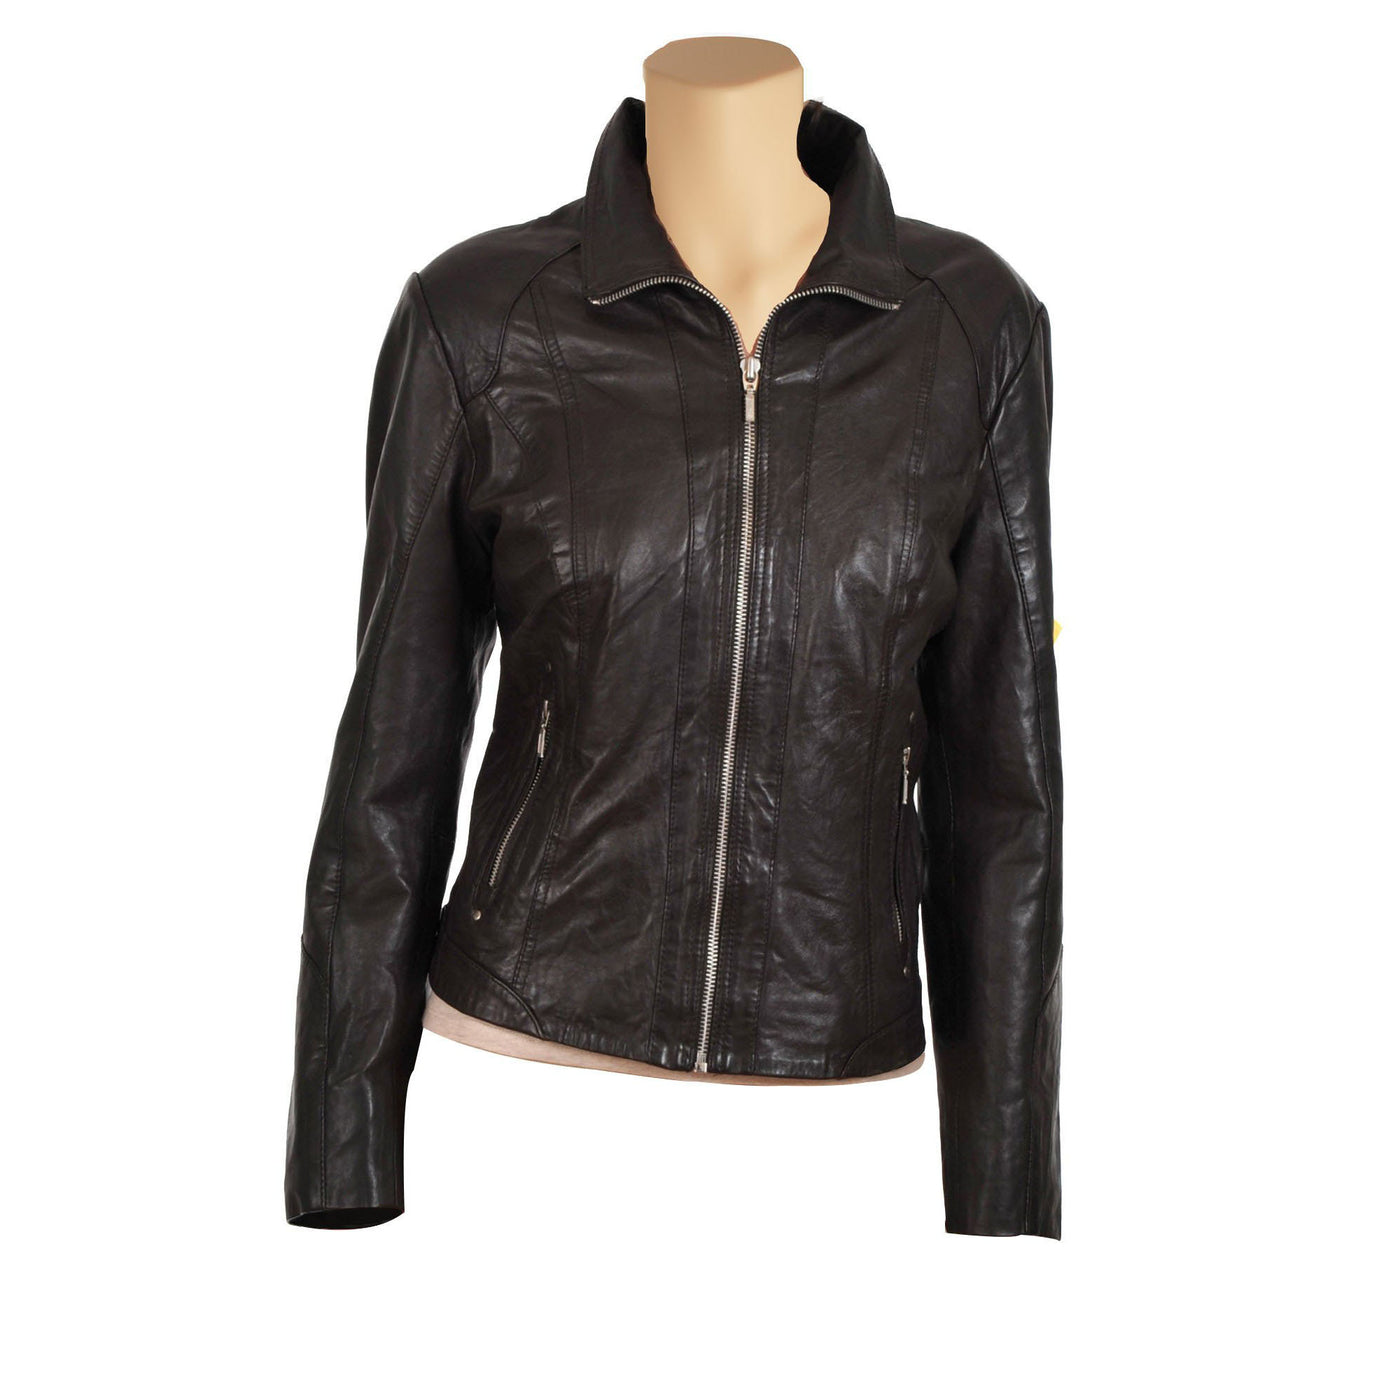 Women's classy brown leather jacket with collars - Lusso Leather - 1